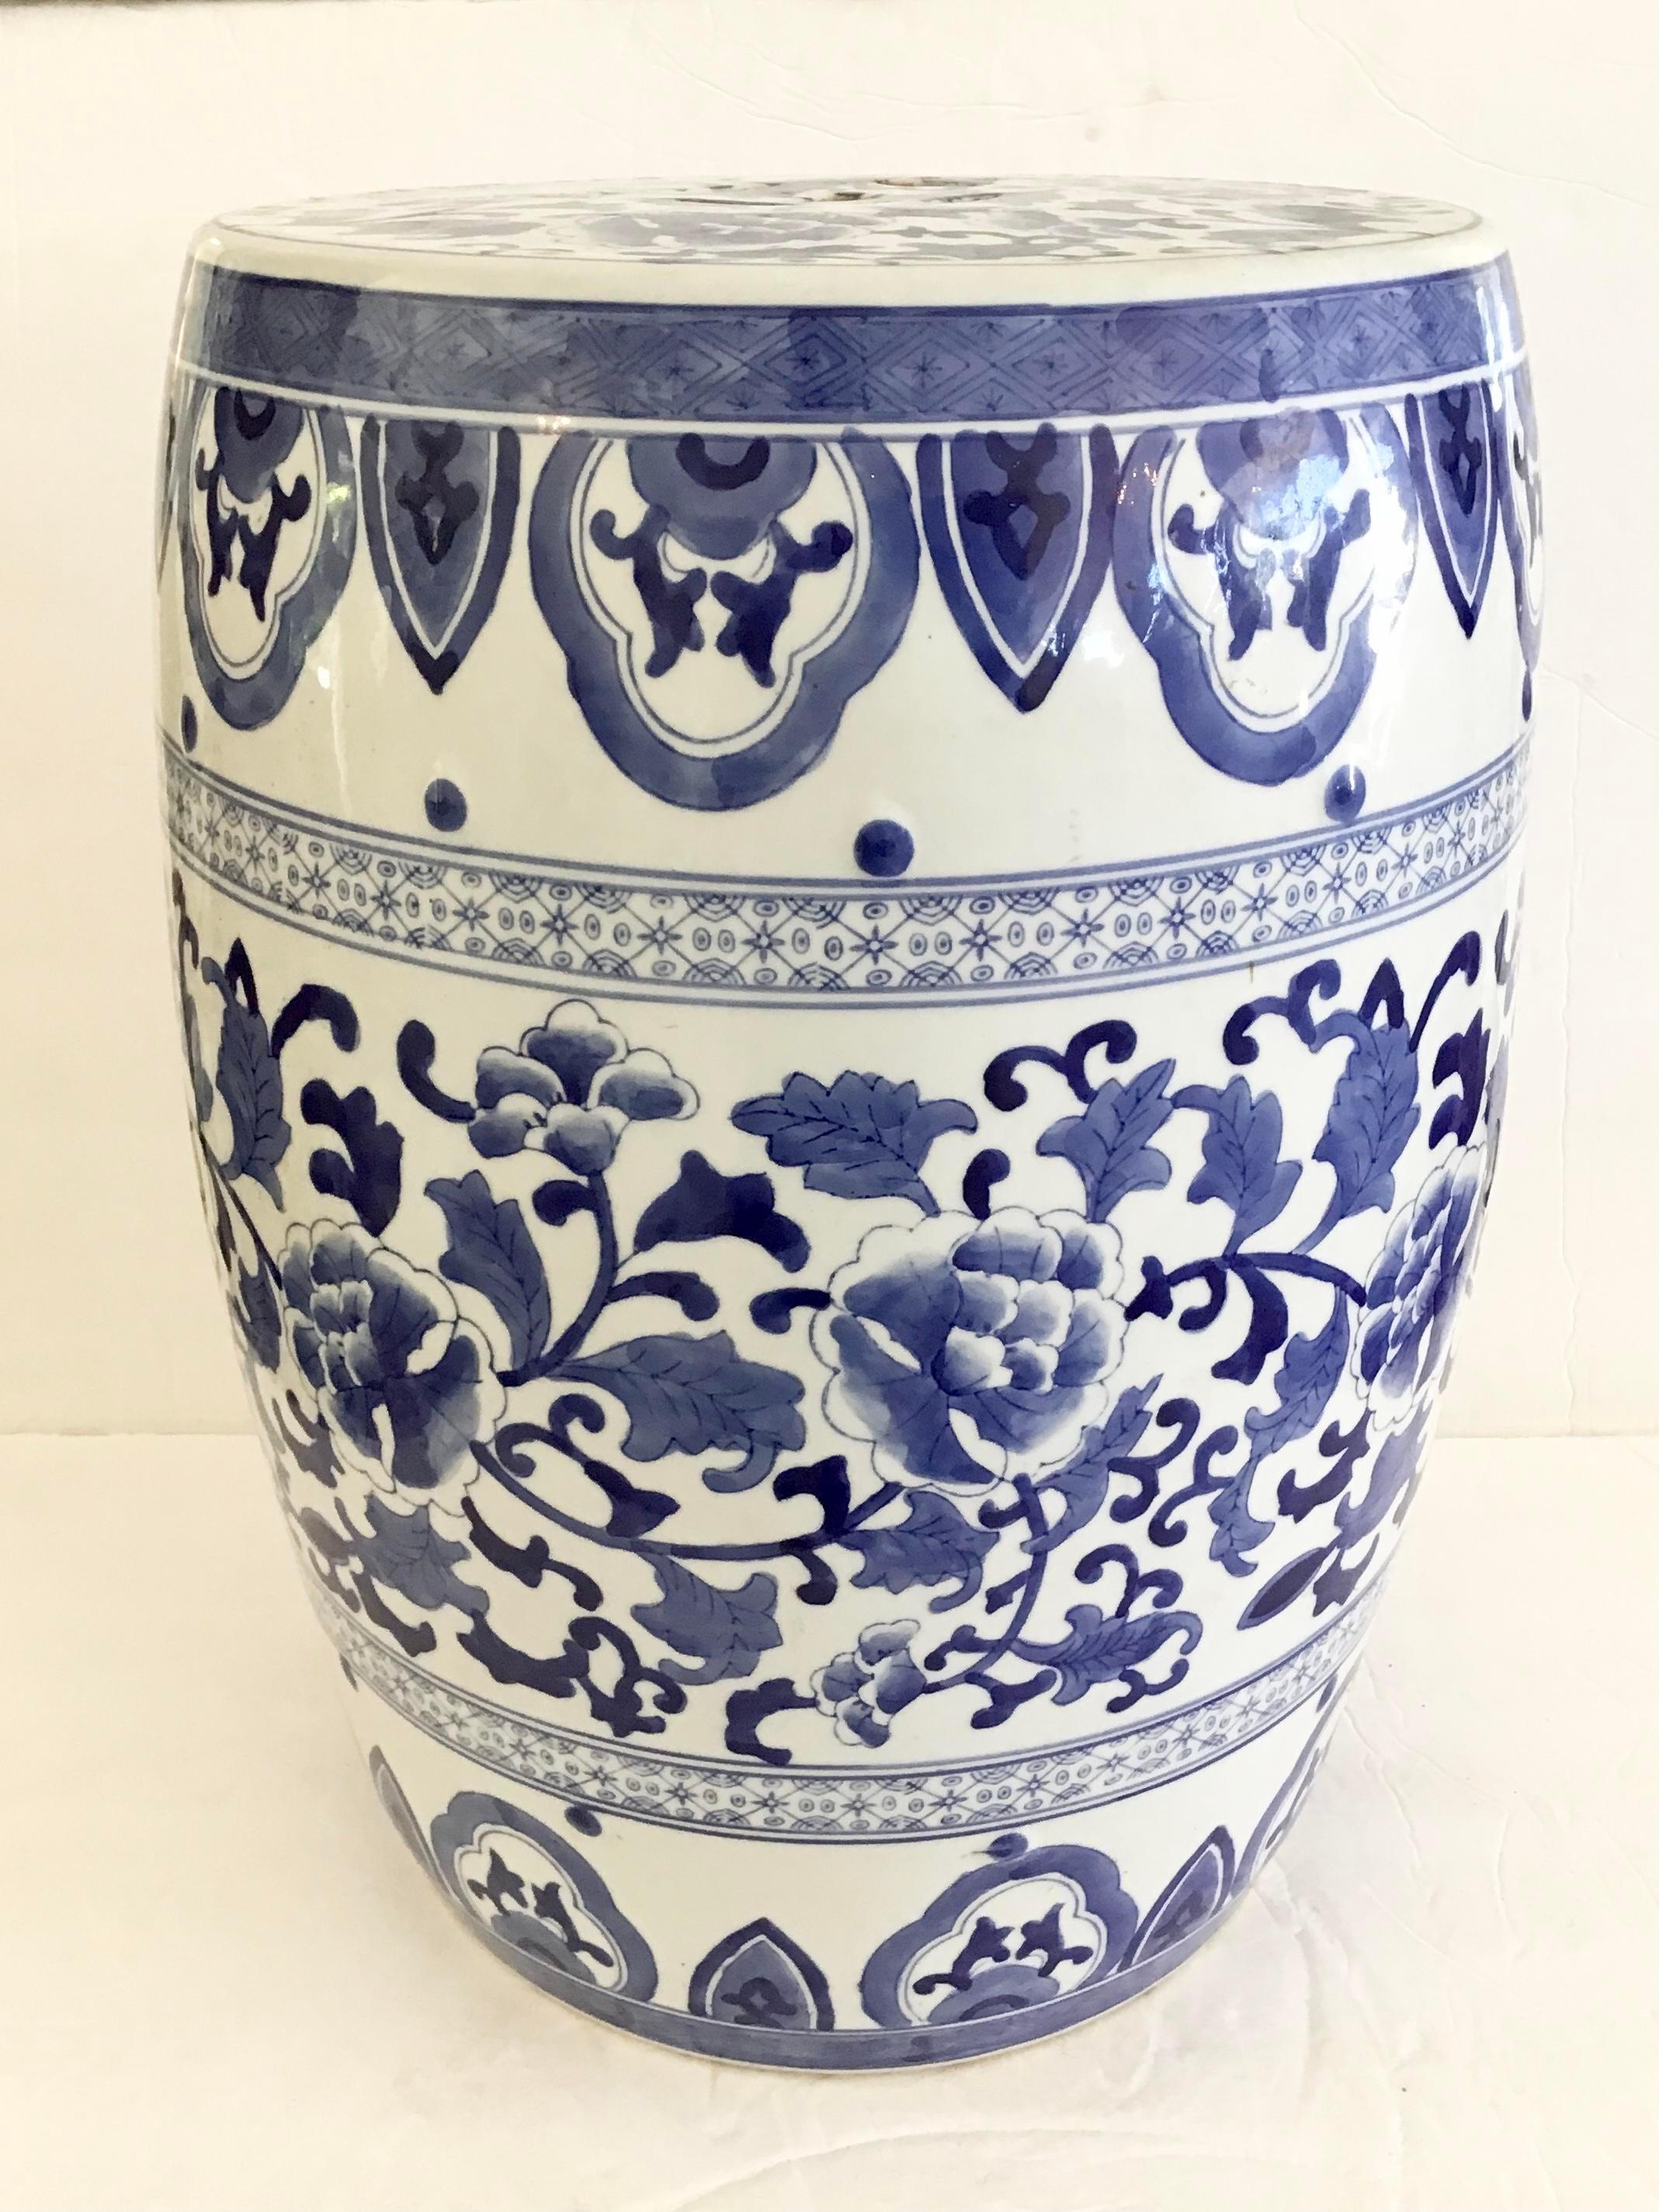 Chinoiserie Blue and White Floral Ceramic Garden Seat